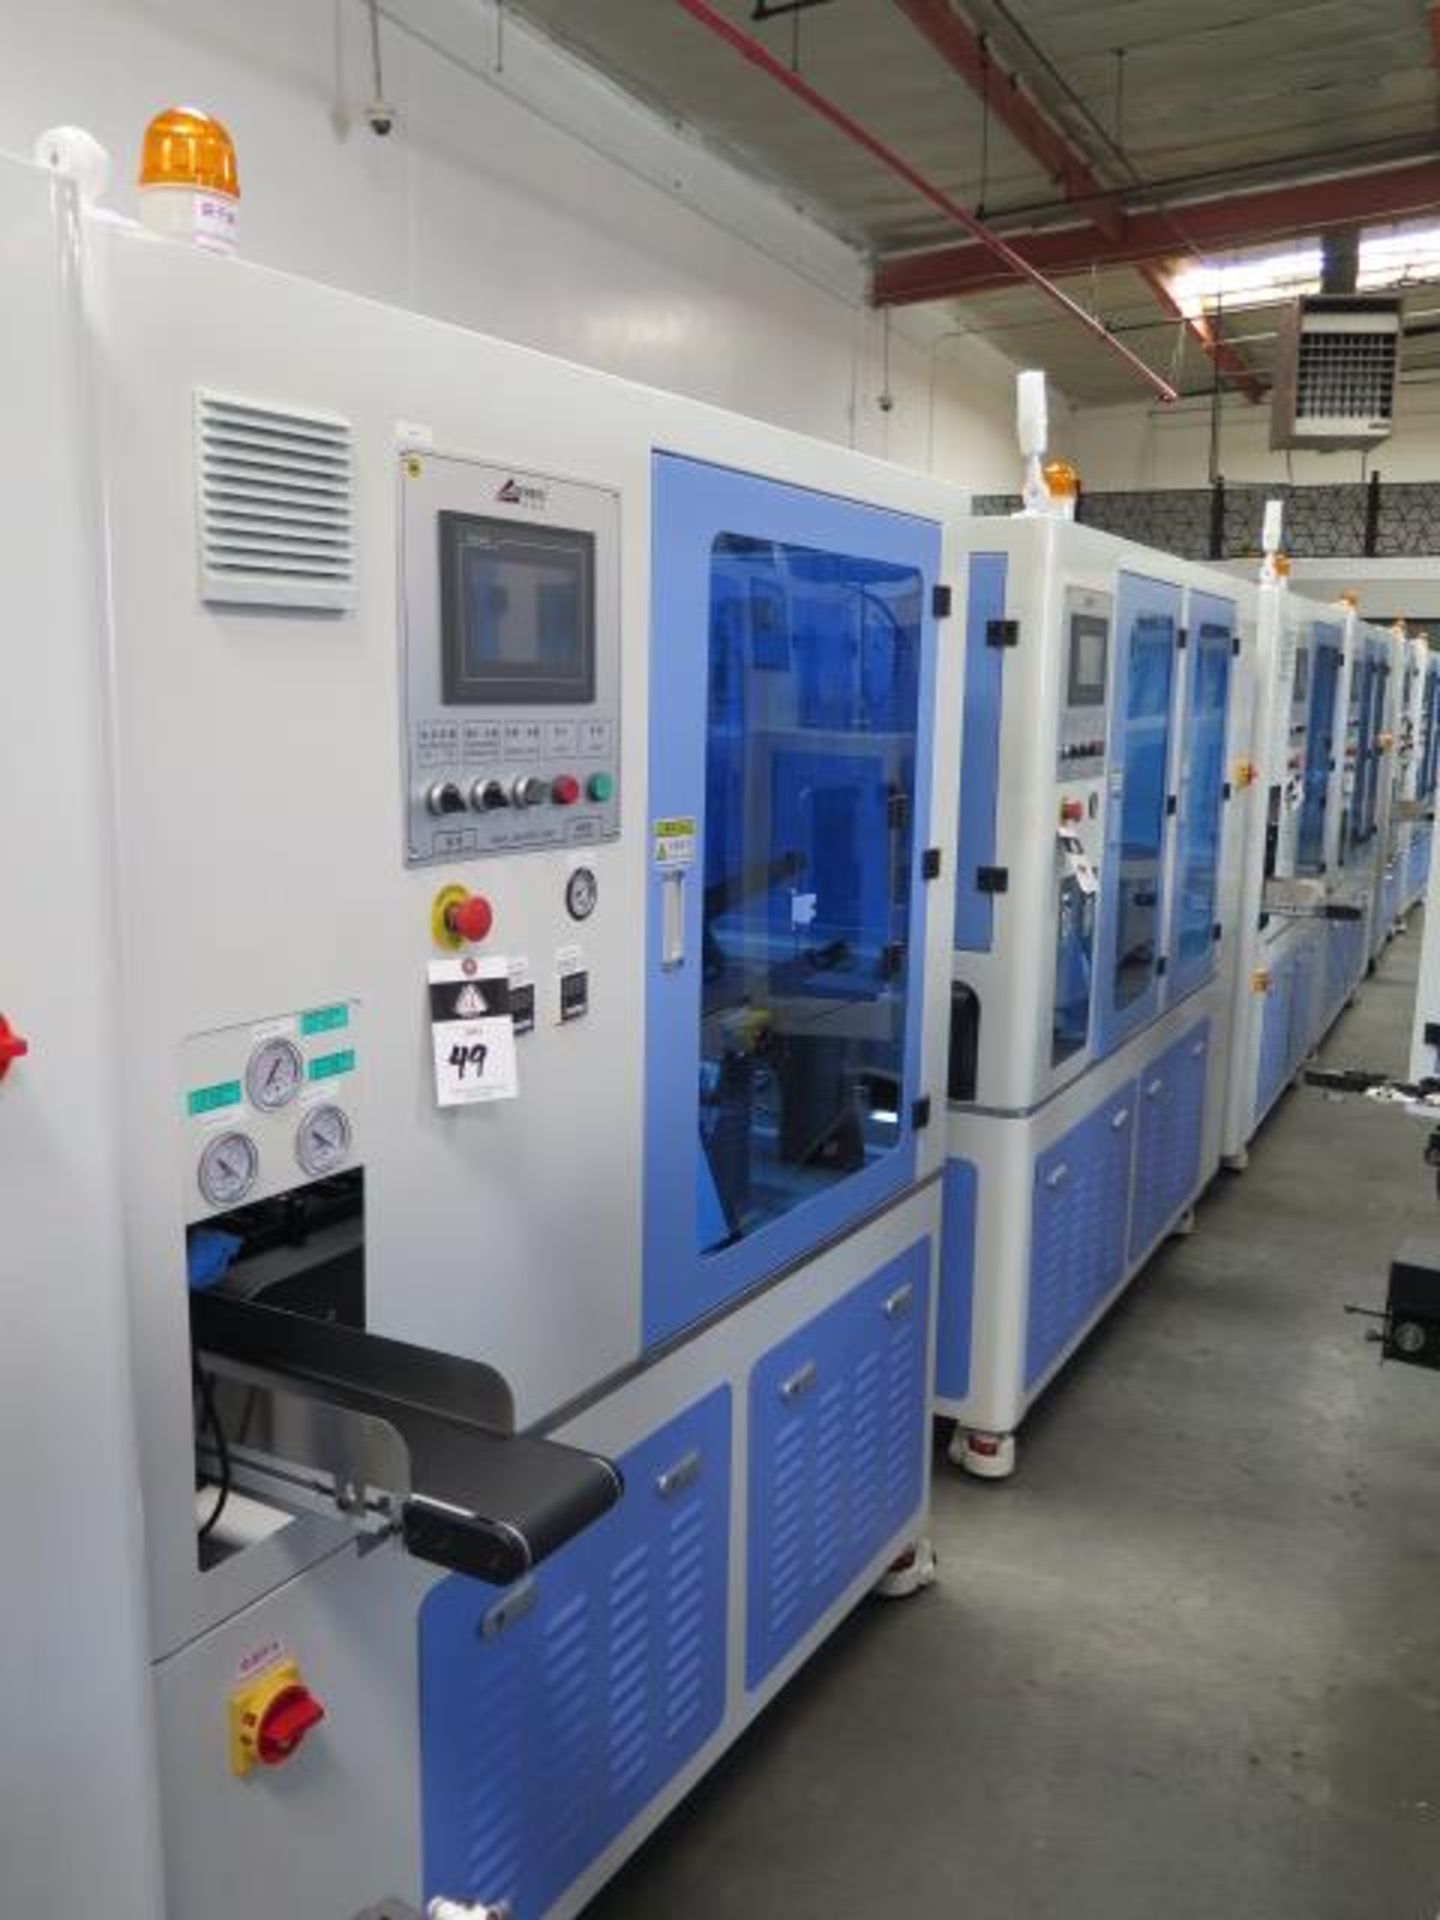 2/2021 Gereke mdl. GRK-TWO1 Cassette Assembly and Packaging Line s/n GRK20210227044 , SOLD AS IS